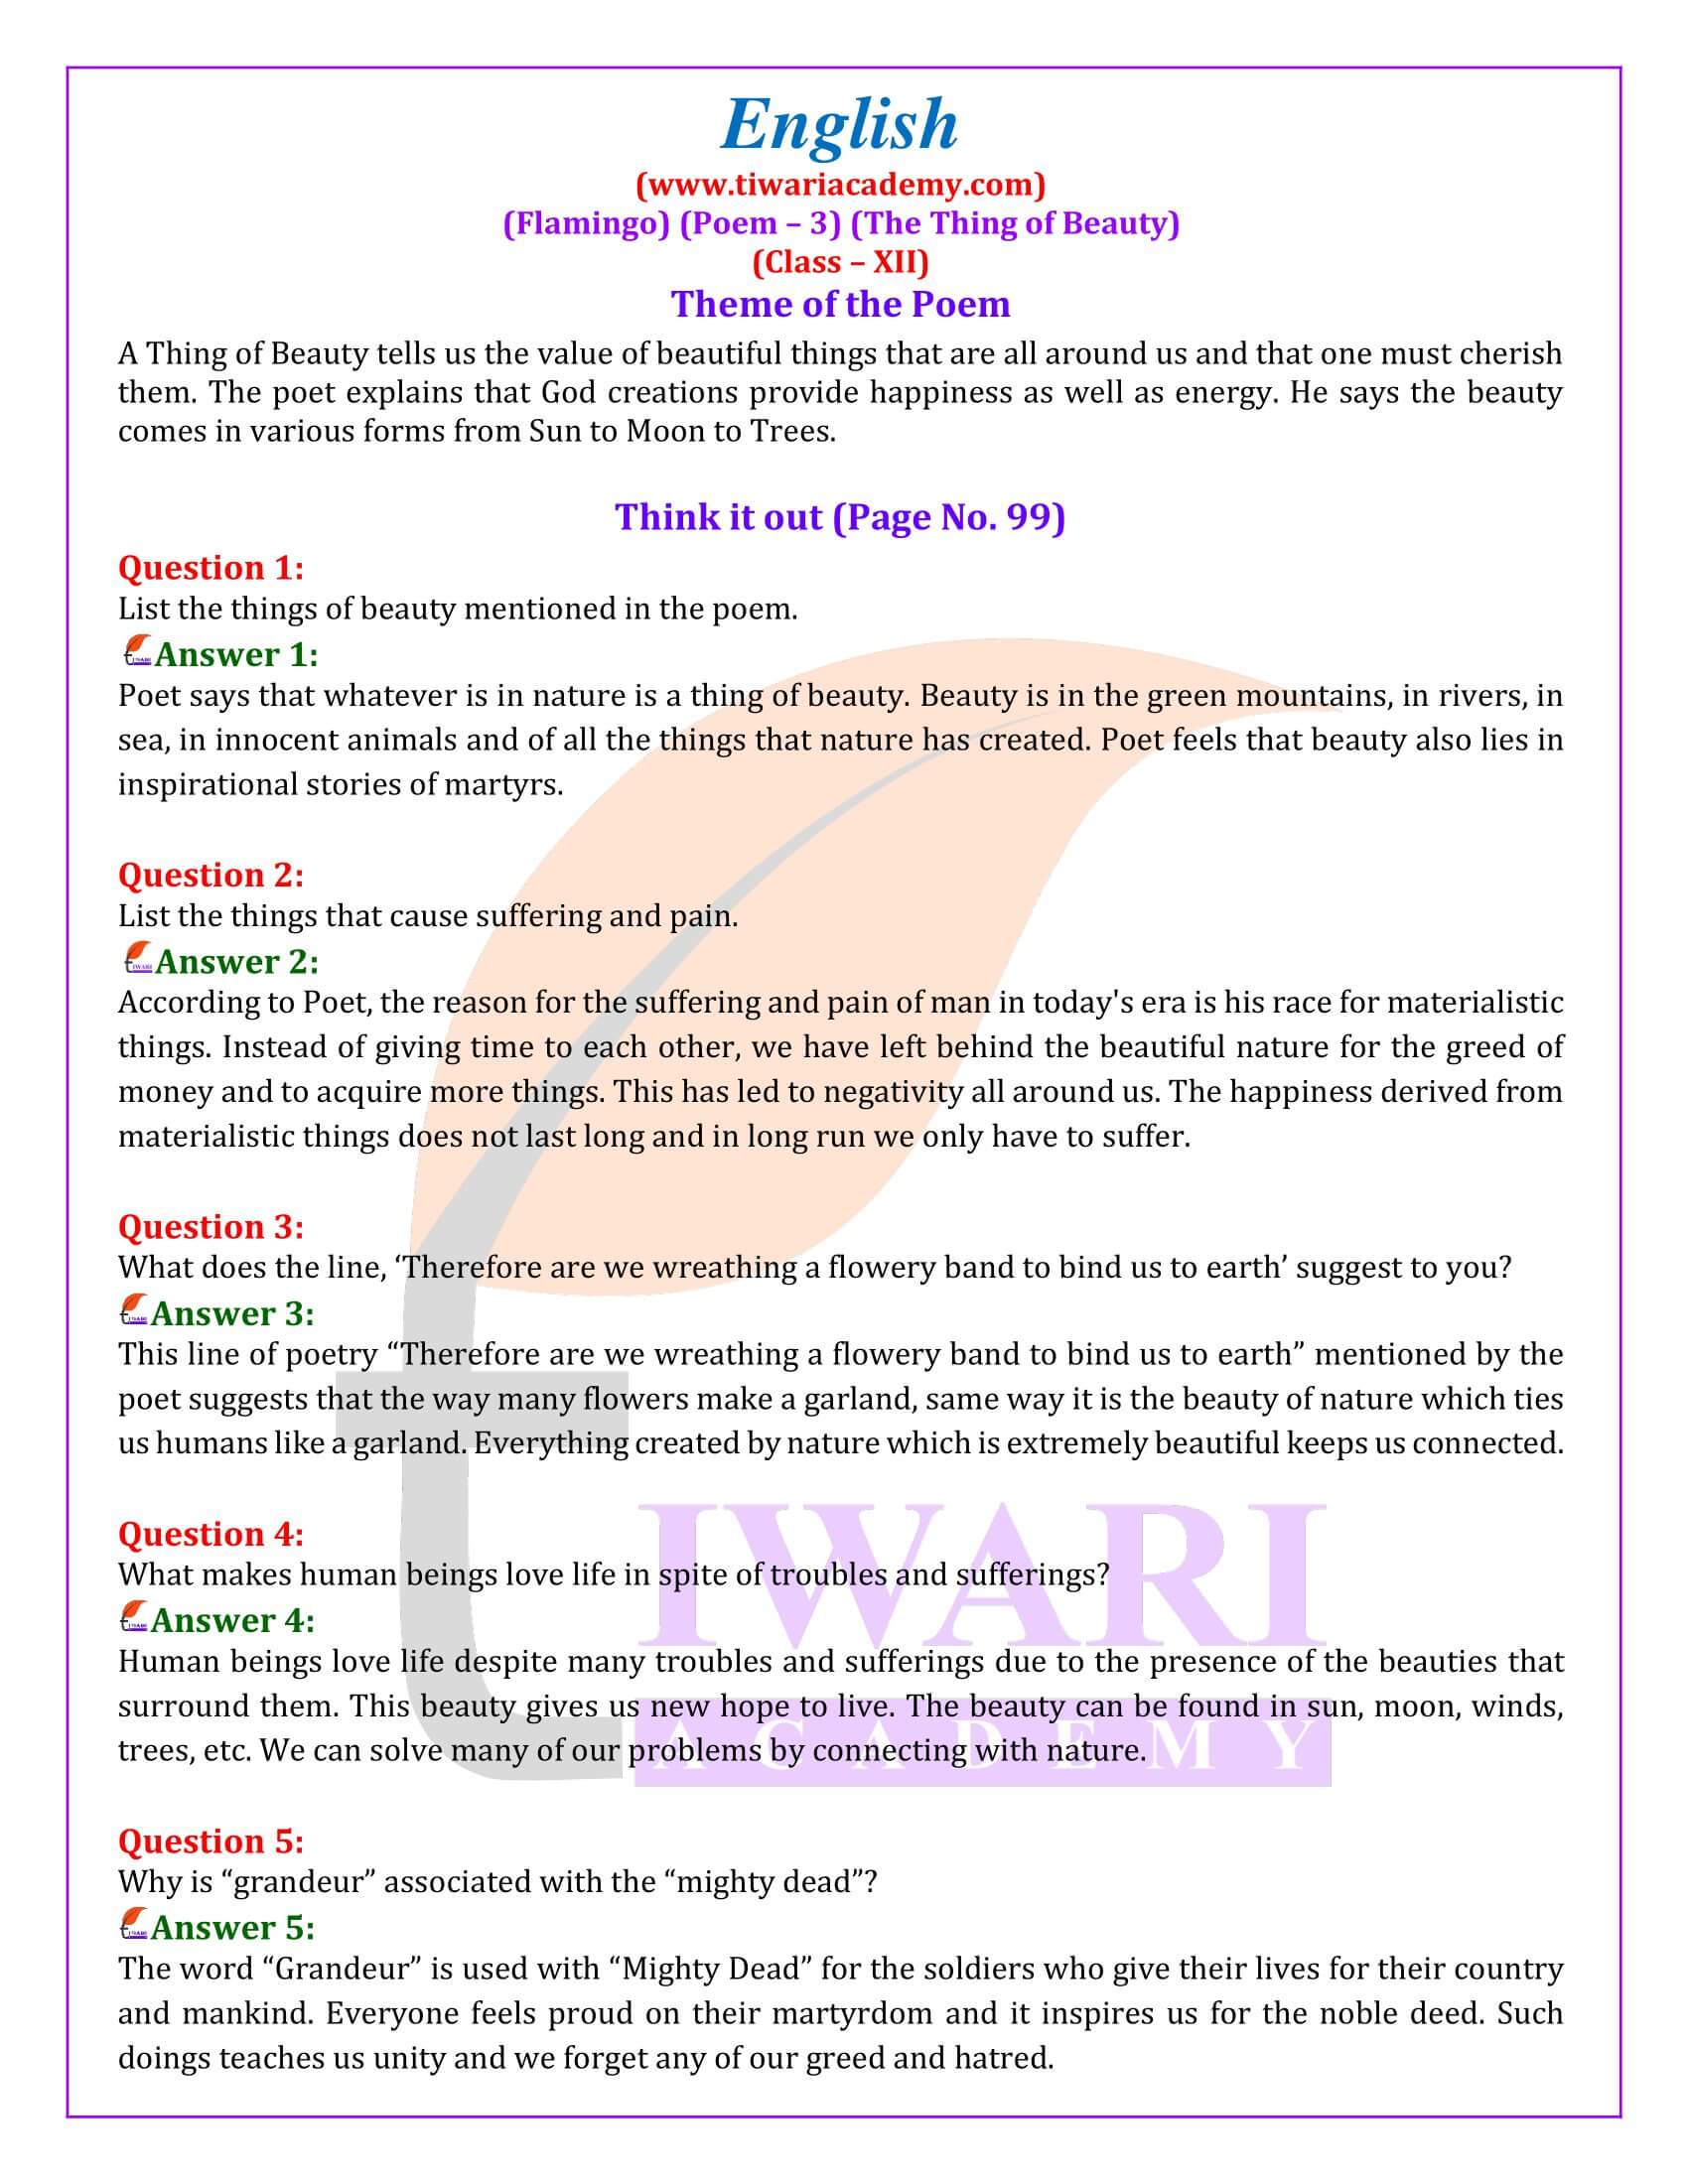 NCERT Solutions for Class 12 English Poem 3